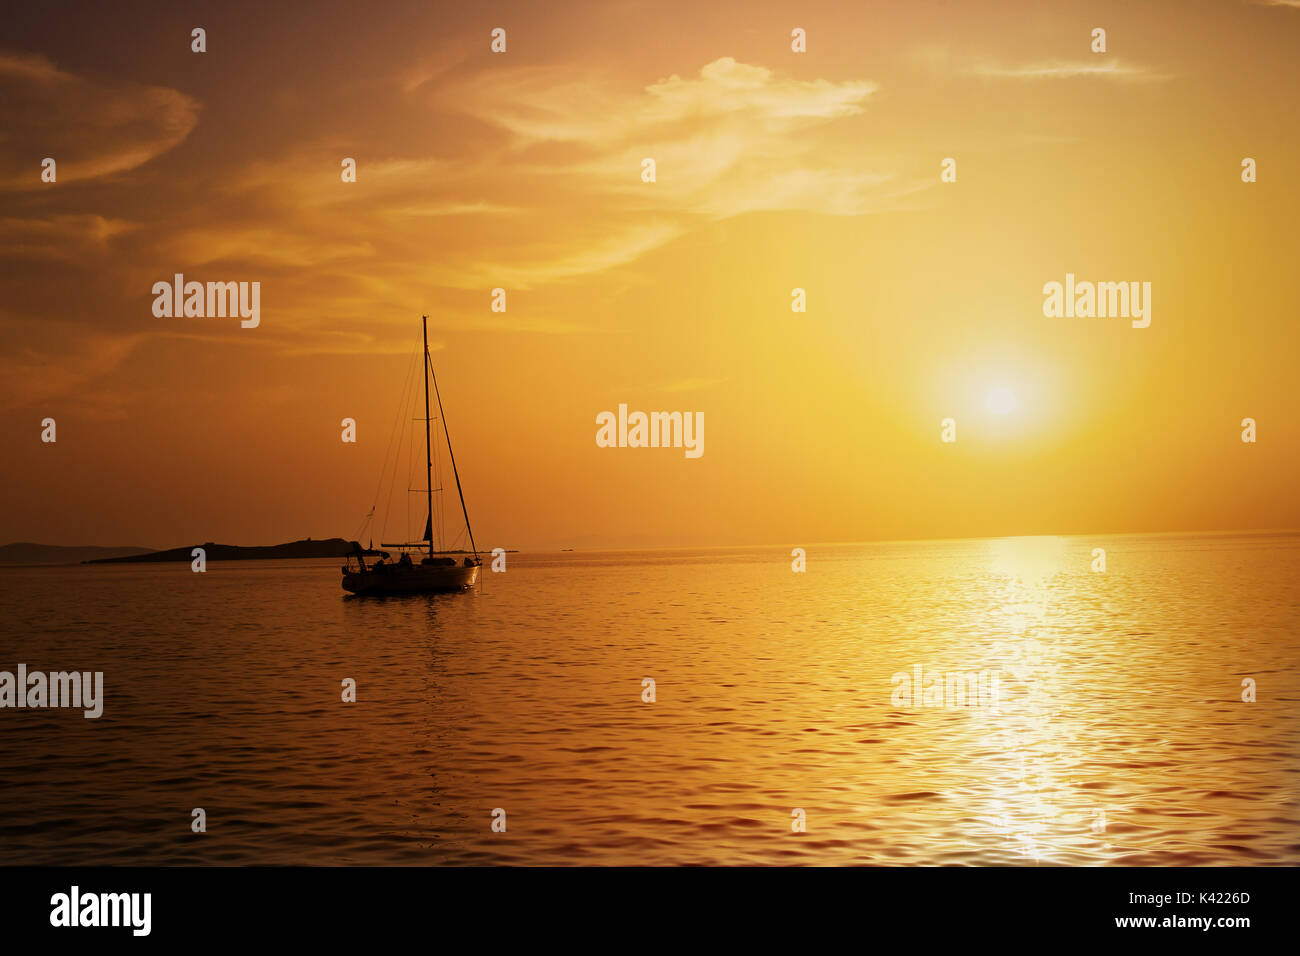 Sailing boat on the sea at sunset. Stock Photo